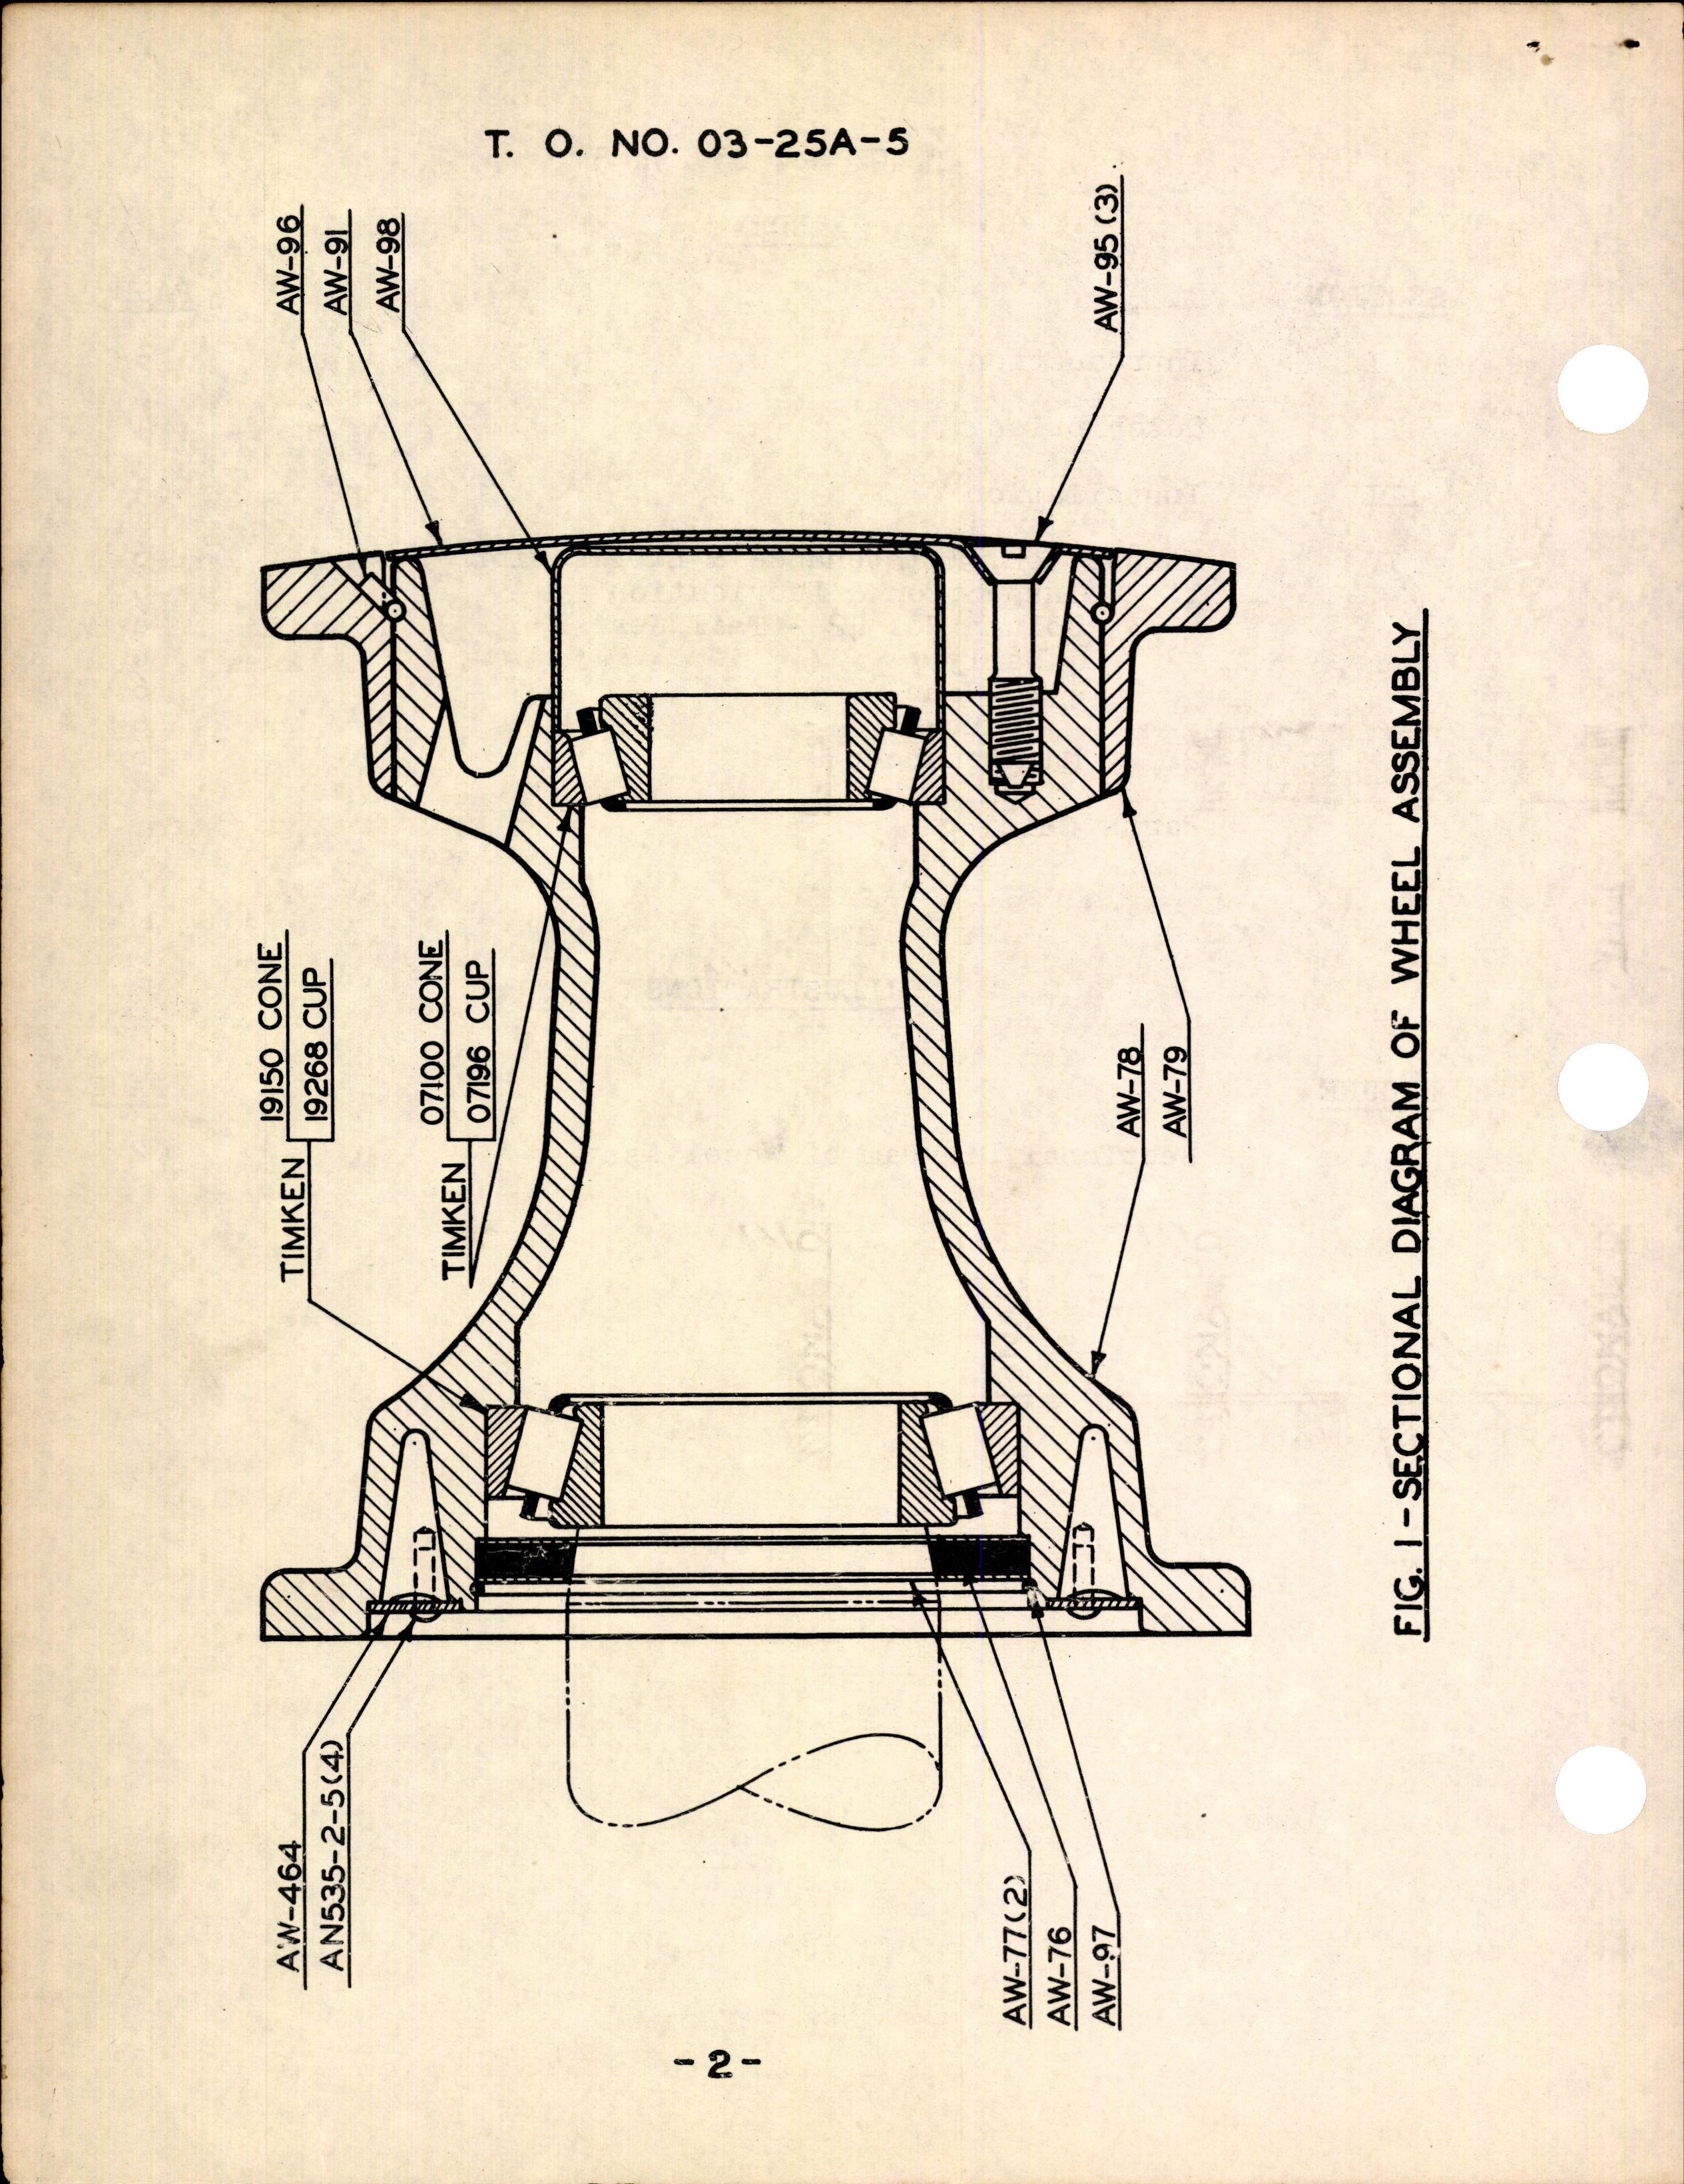 Sample page 4 from AirCorps Library document: Handbook of Instructions with Parts Catalog for Smooth Contour Tail or Nose Wheels